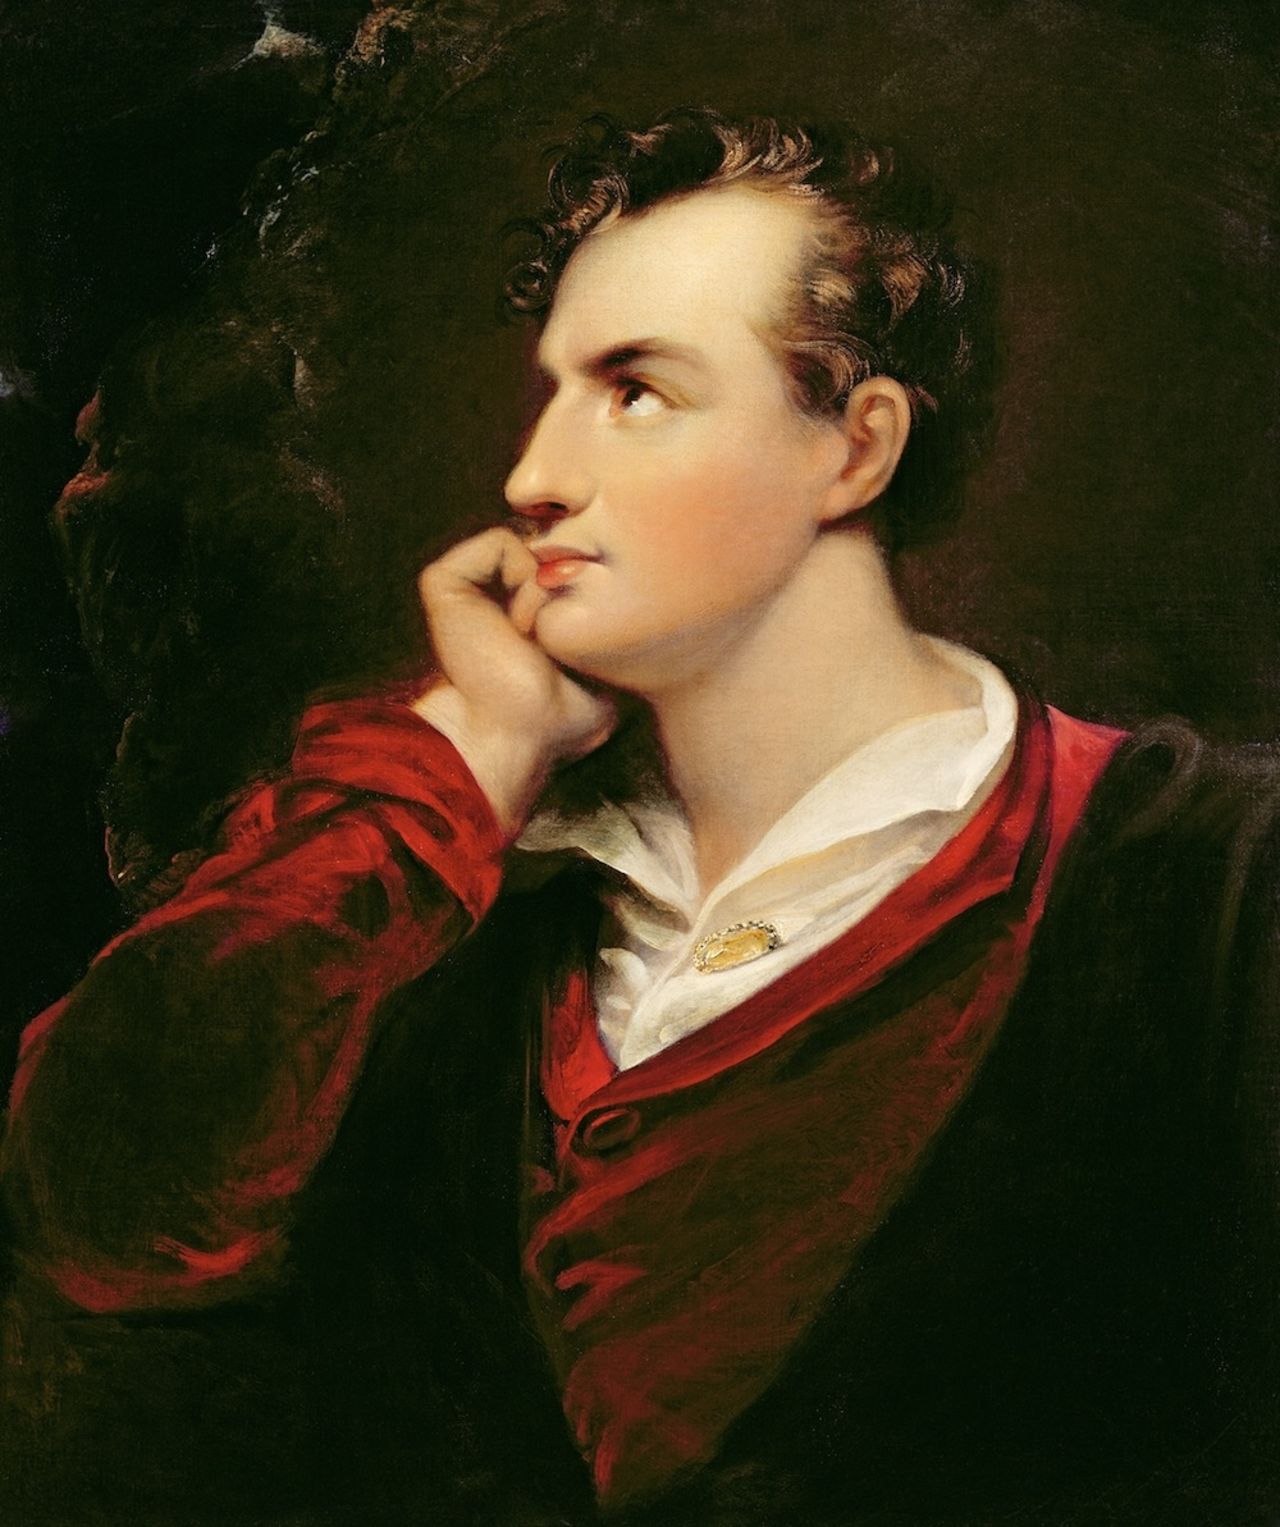 1820: Lord Byron popularizes the Vinegar and Water Diet, which entails drinking water mixed with apple cider vinegar.